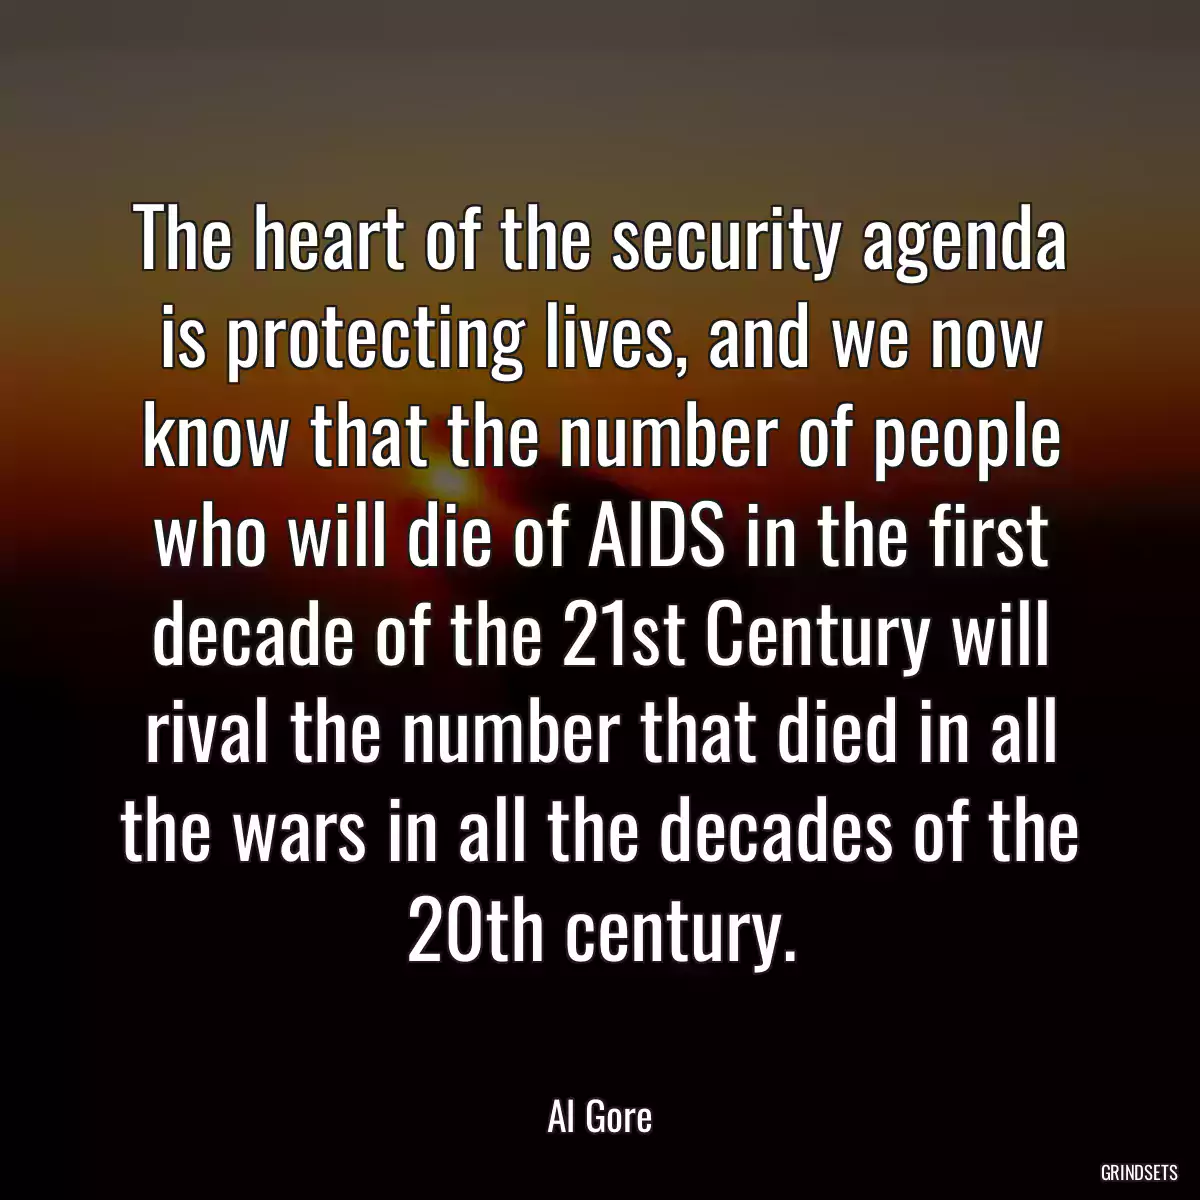 The heart of the security agenda is protecting lives, and we now know that the number of people who will die of AIDS in the first decade of the 21st Century will rival the number that died in all the wars in all the decades of the 20th century.